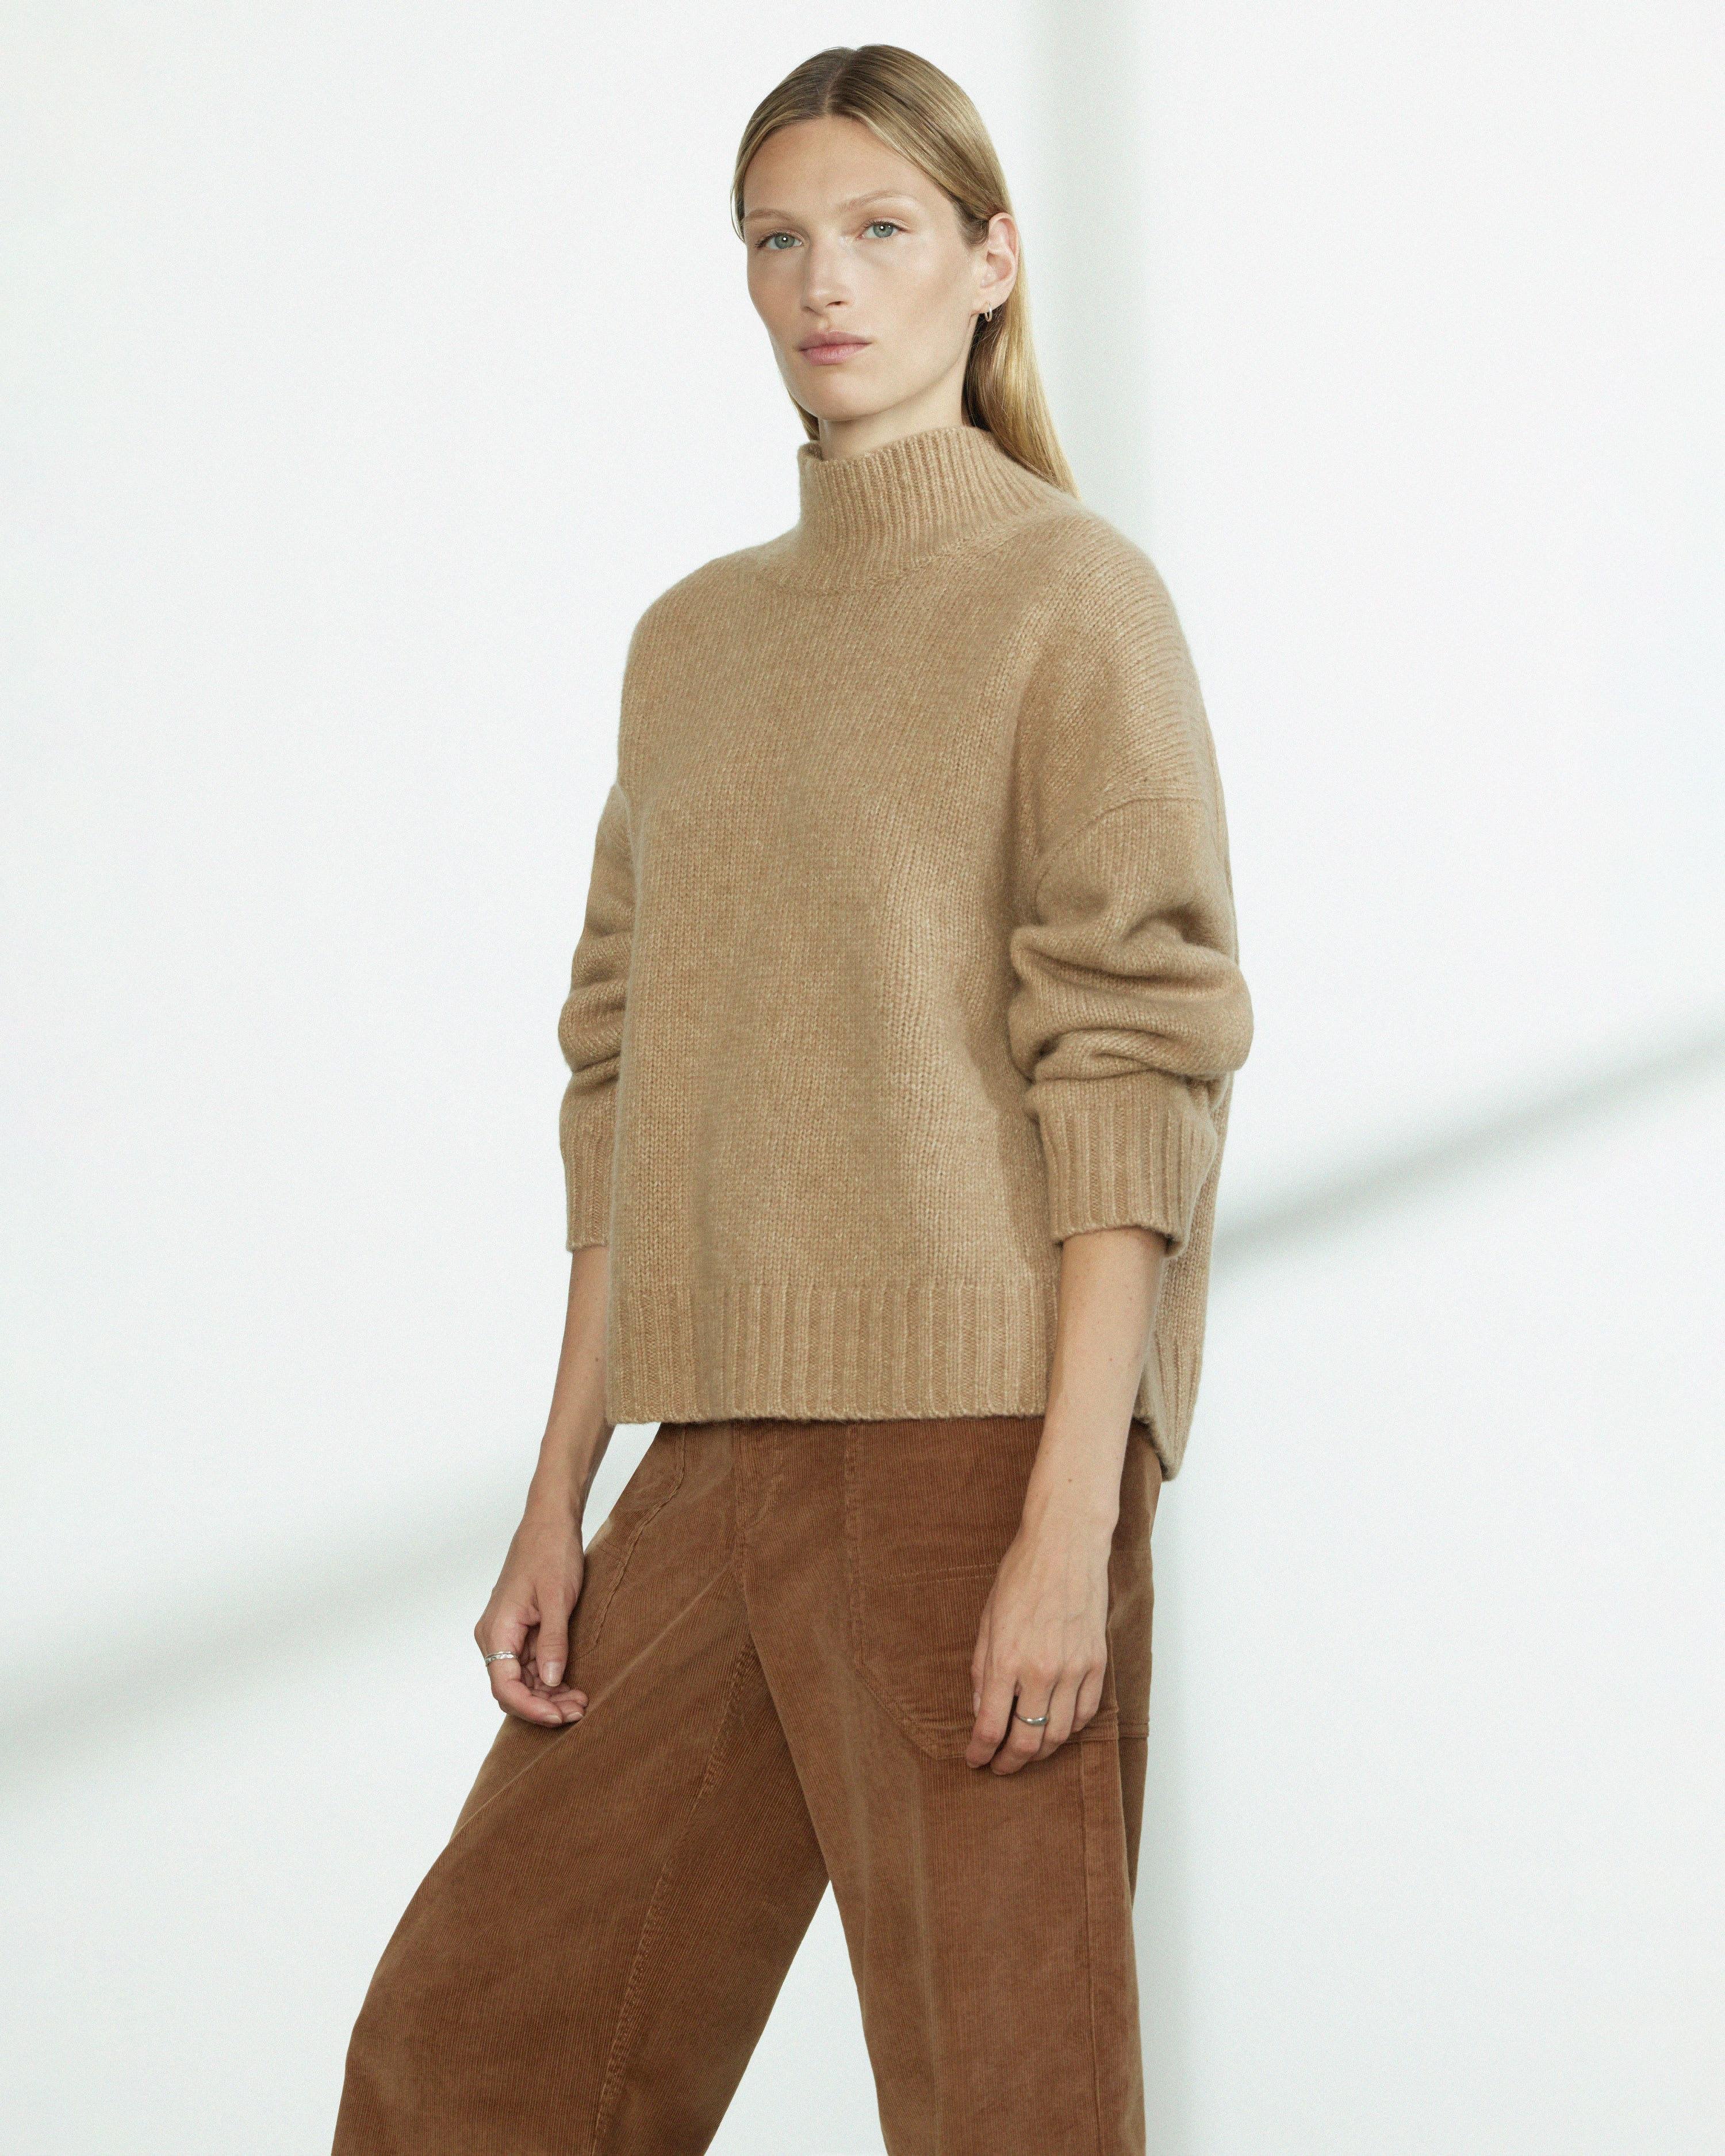 The Cloud Oversized Turtleneck by EVERLANE